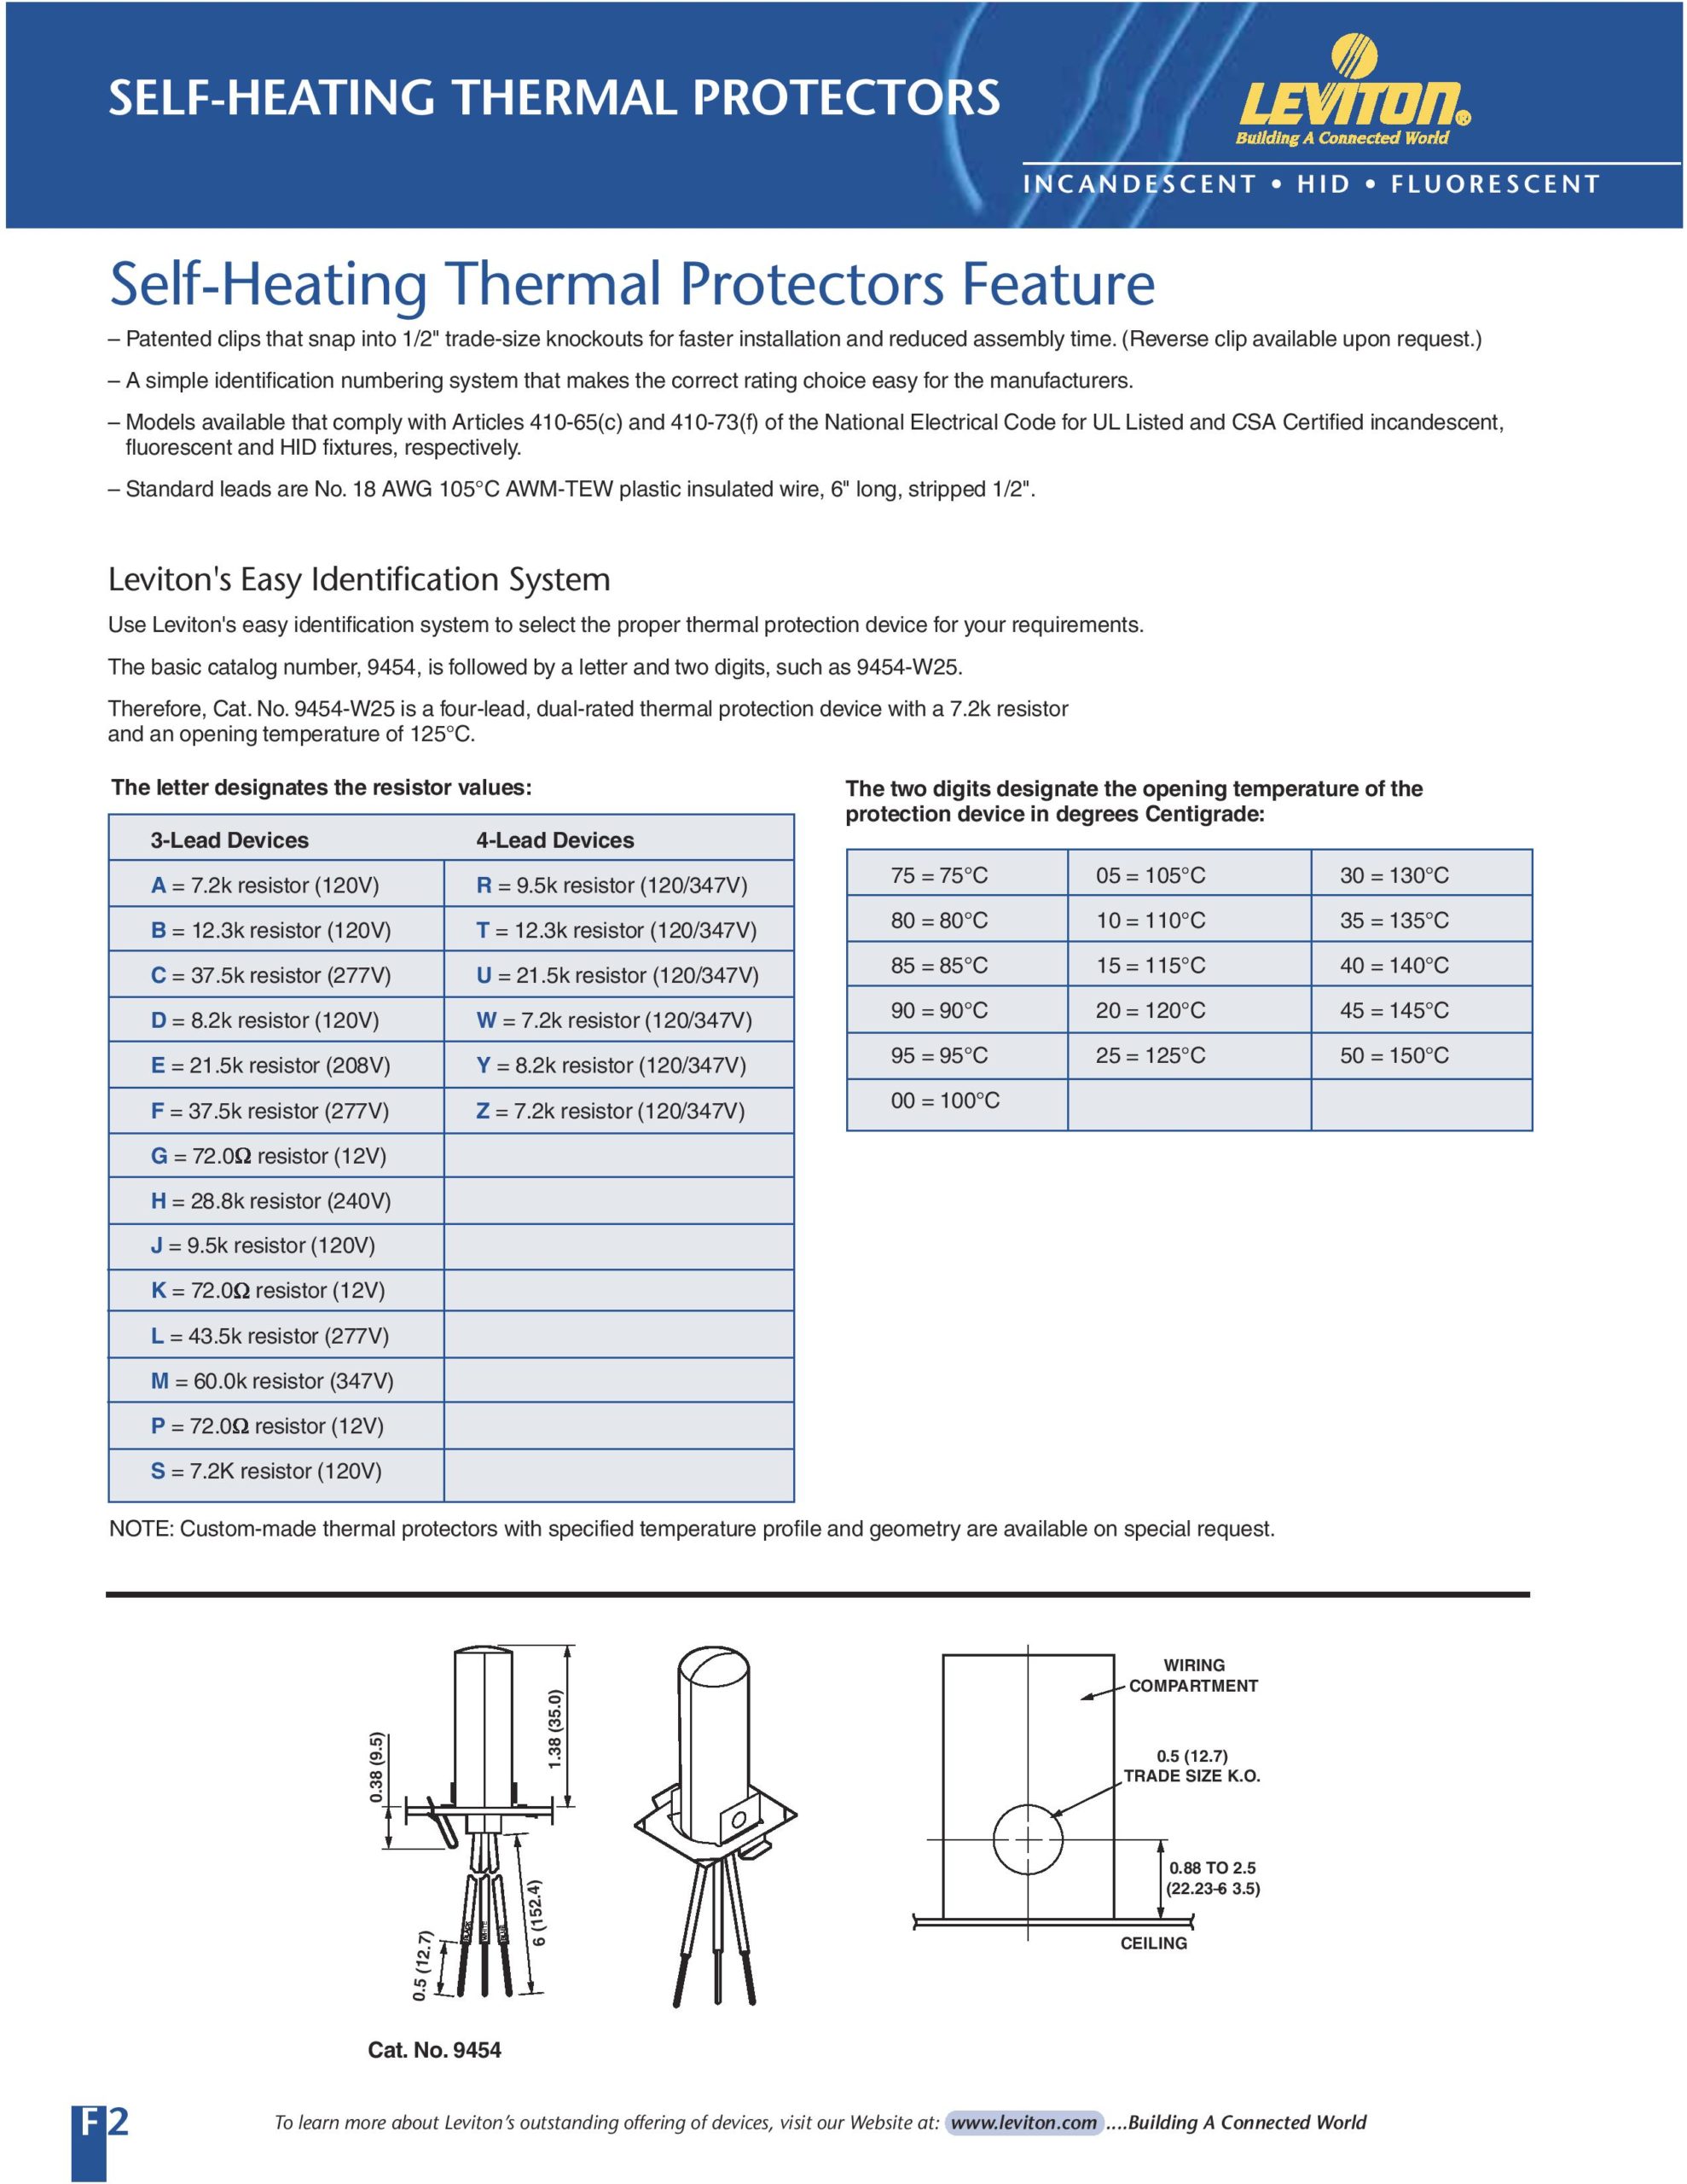 Thermal Protector Spec Sheet